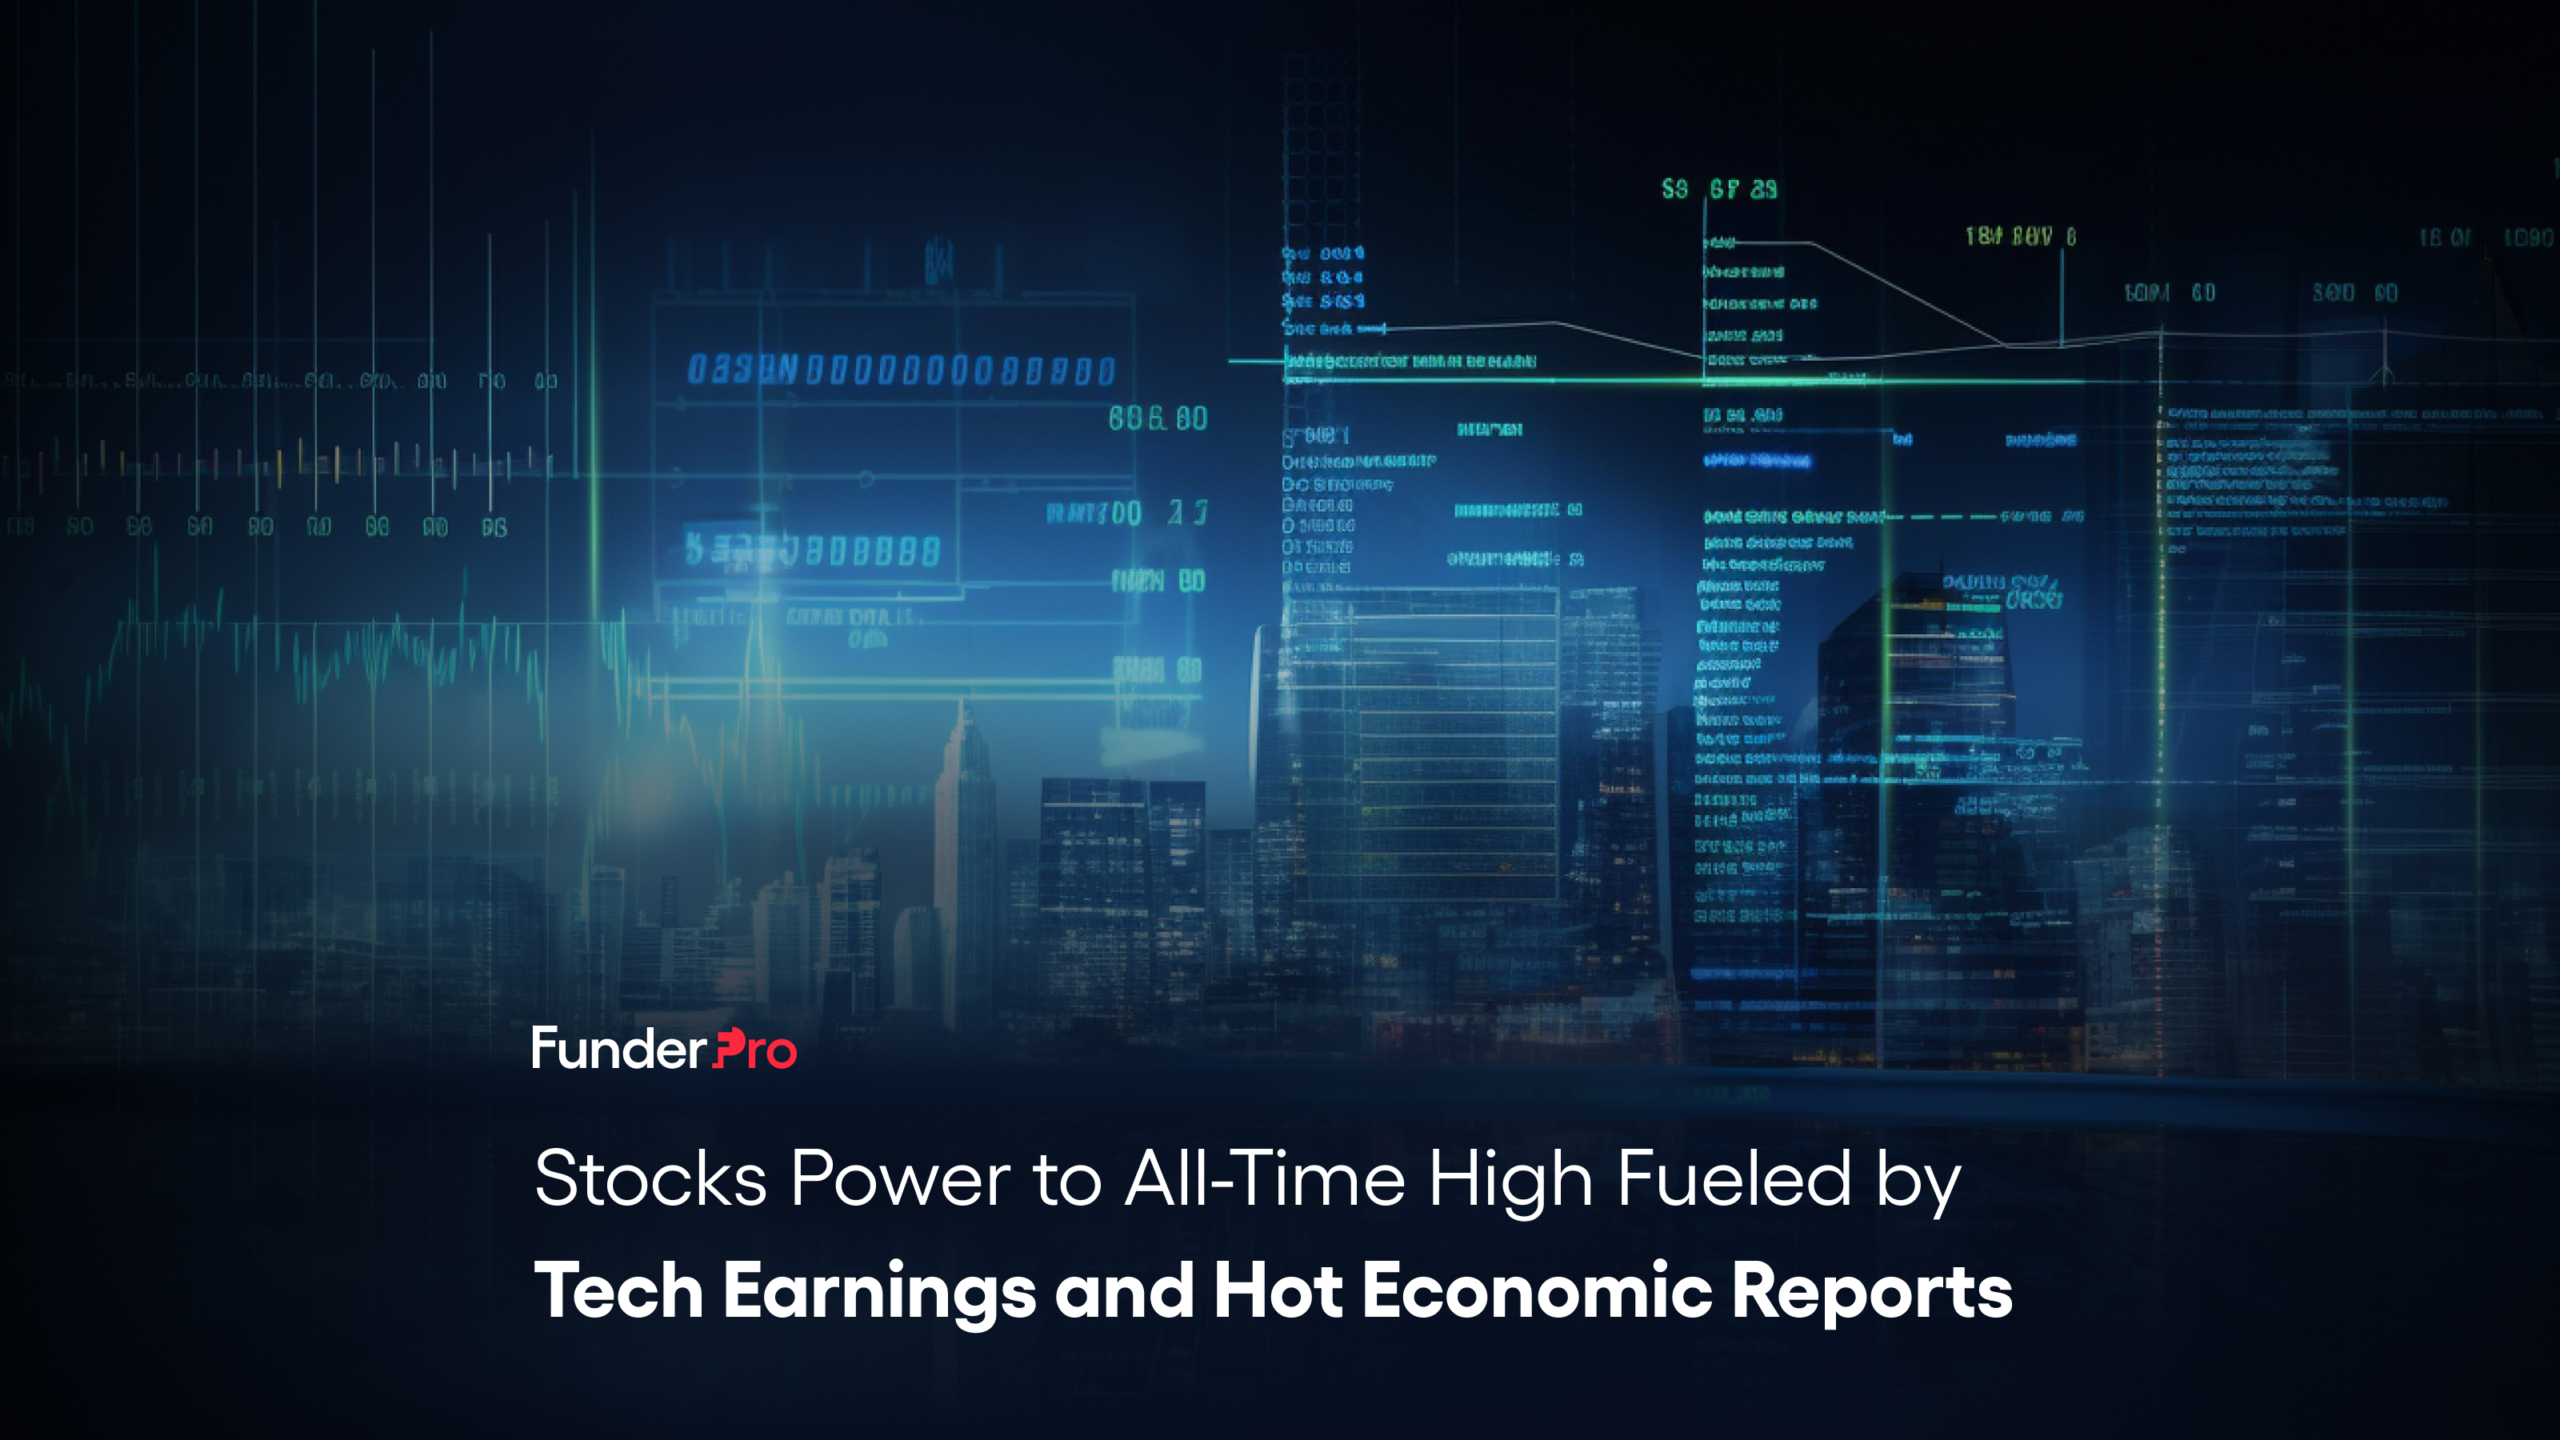 Stocks Power to All-Time High Fueled by Tech Earnings and Hot Economic Reports